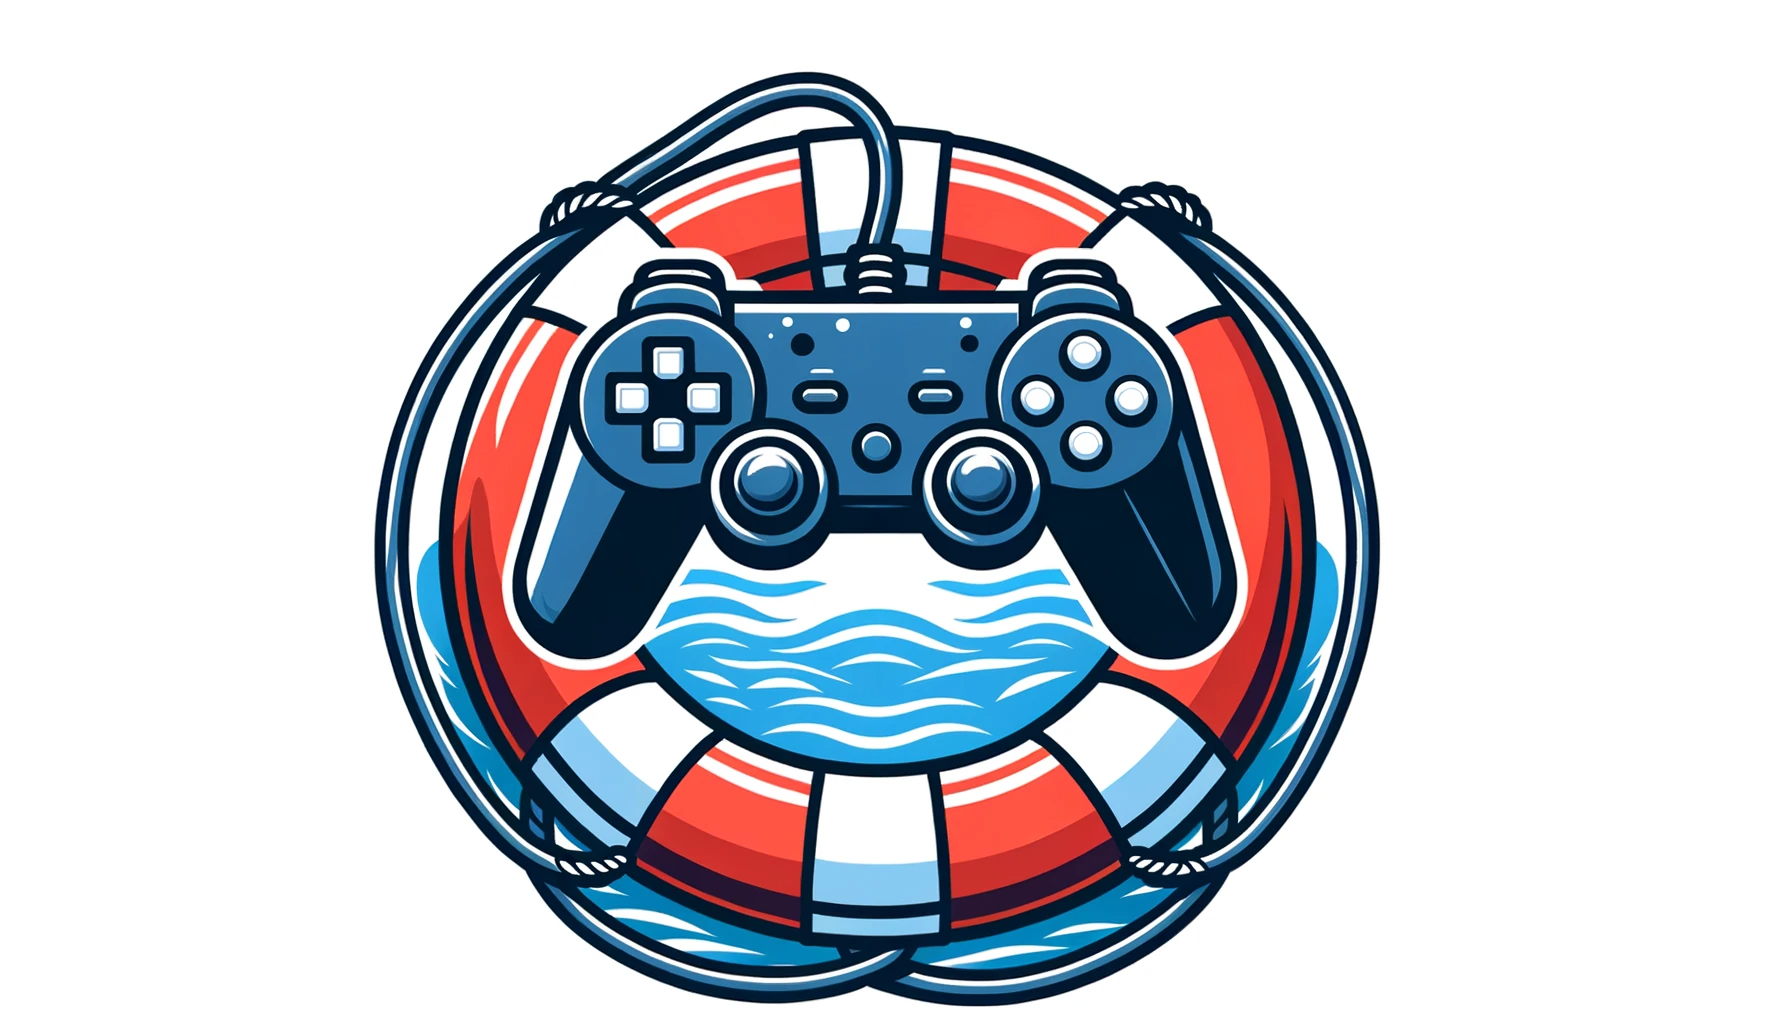 Illustration of a game controller intertwined with a lifebuoy, symbolizing the safety and support provided to gamers